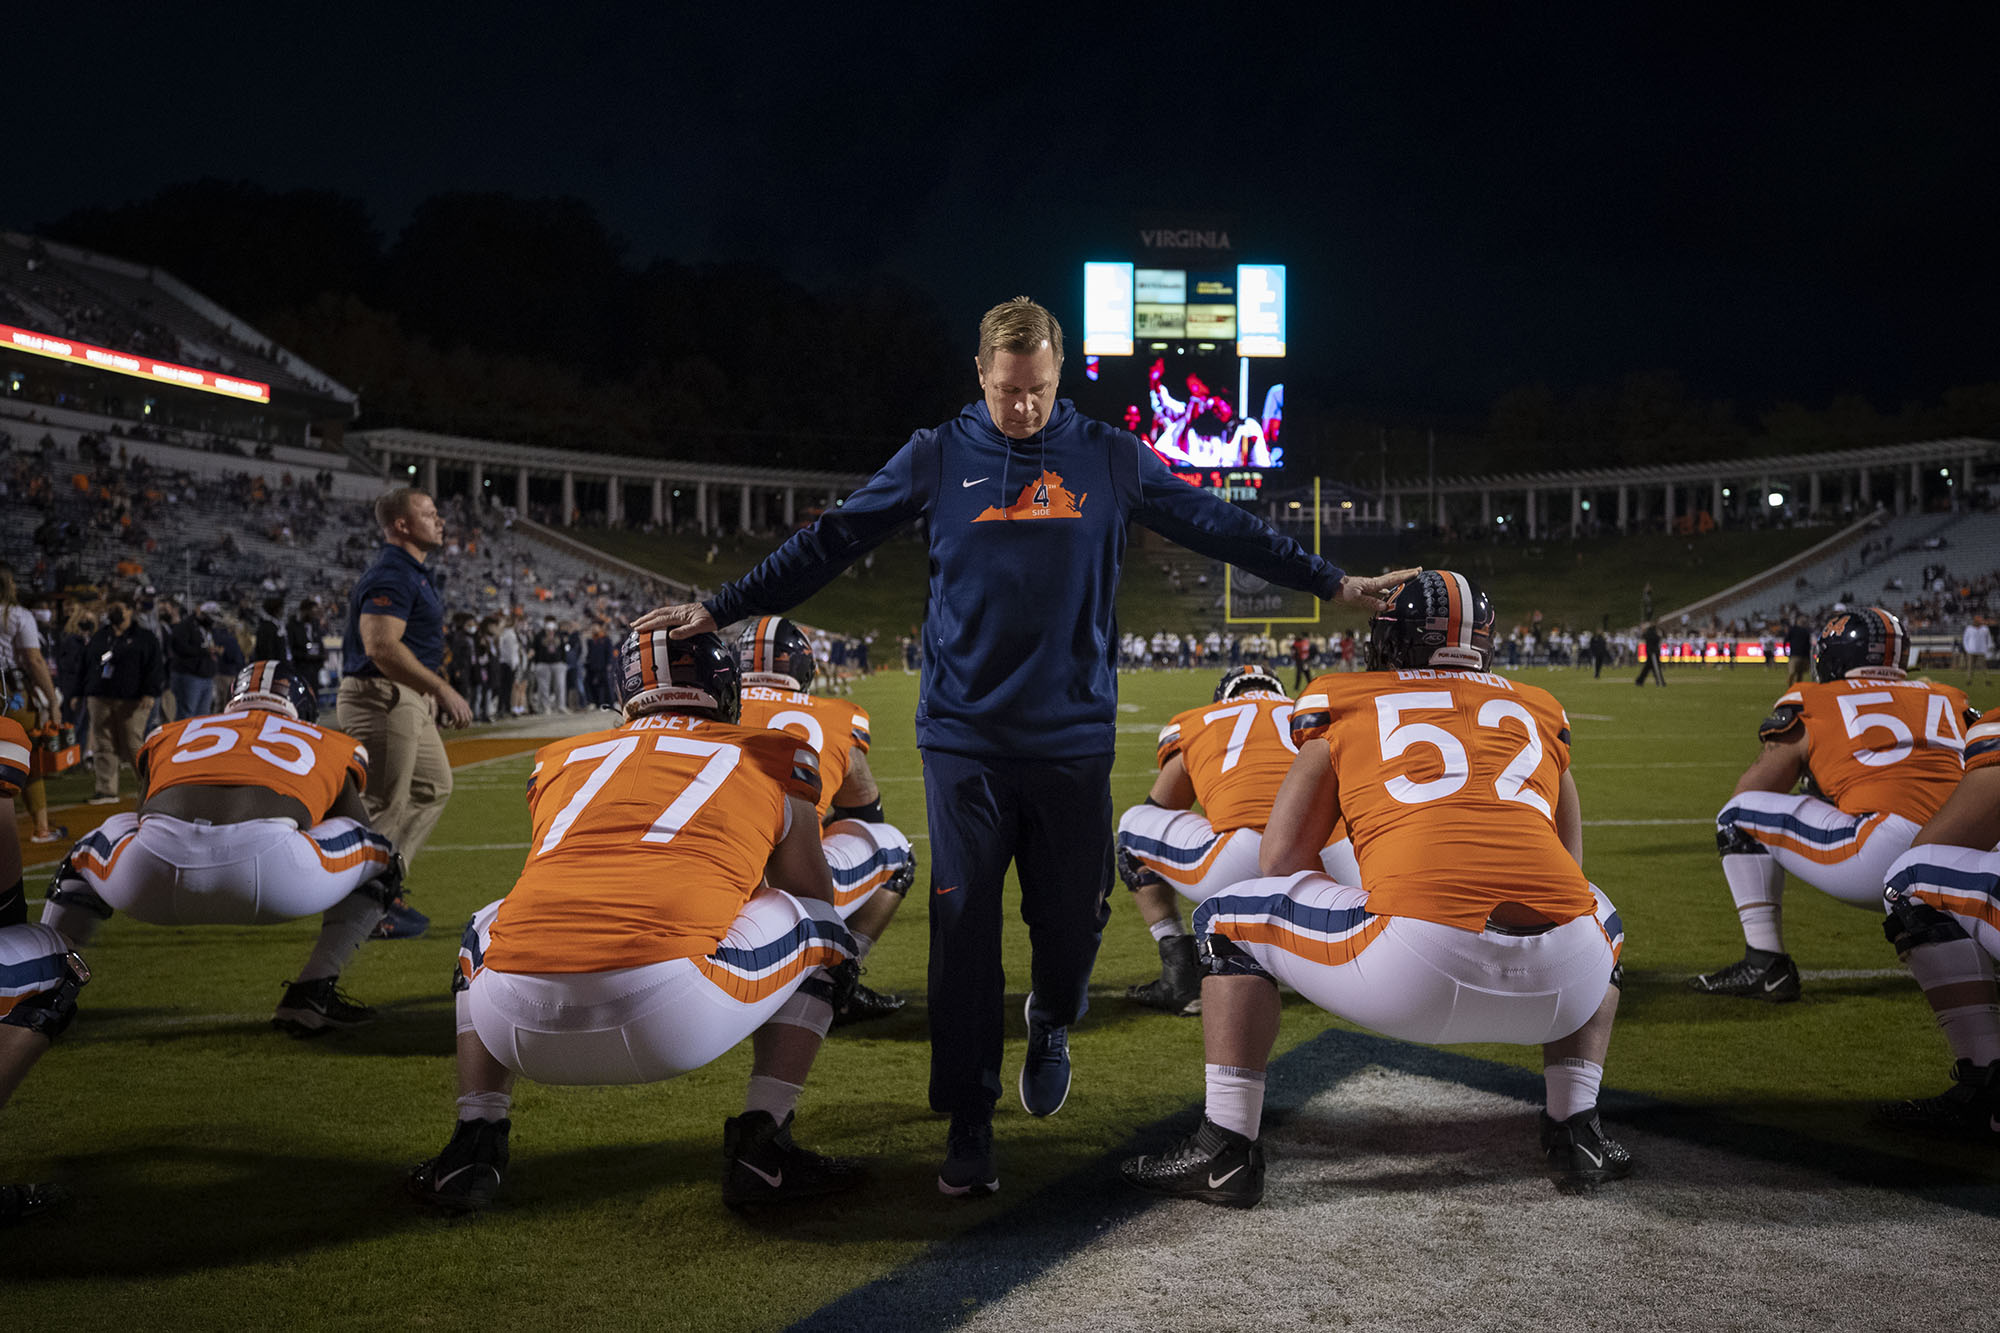 Bronco Mendenhall touching the helmets of two players while the whole team squats waiting for the game to start